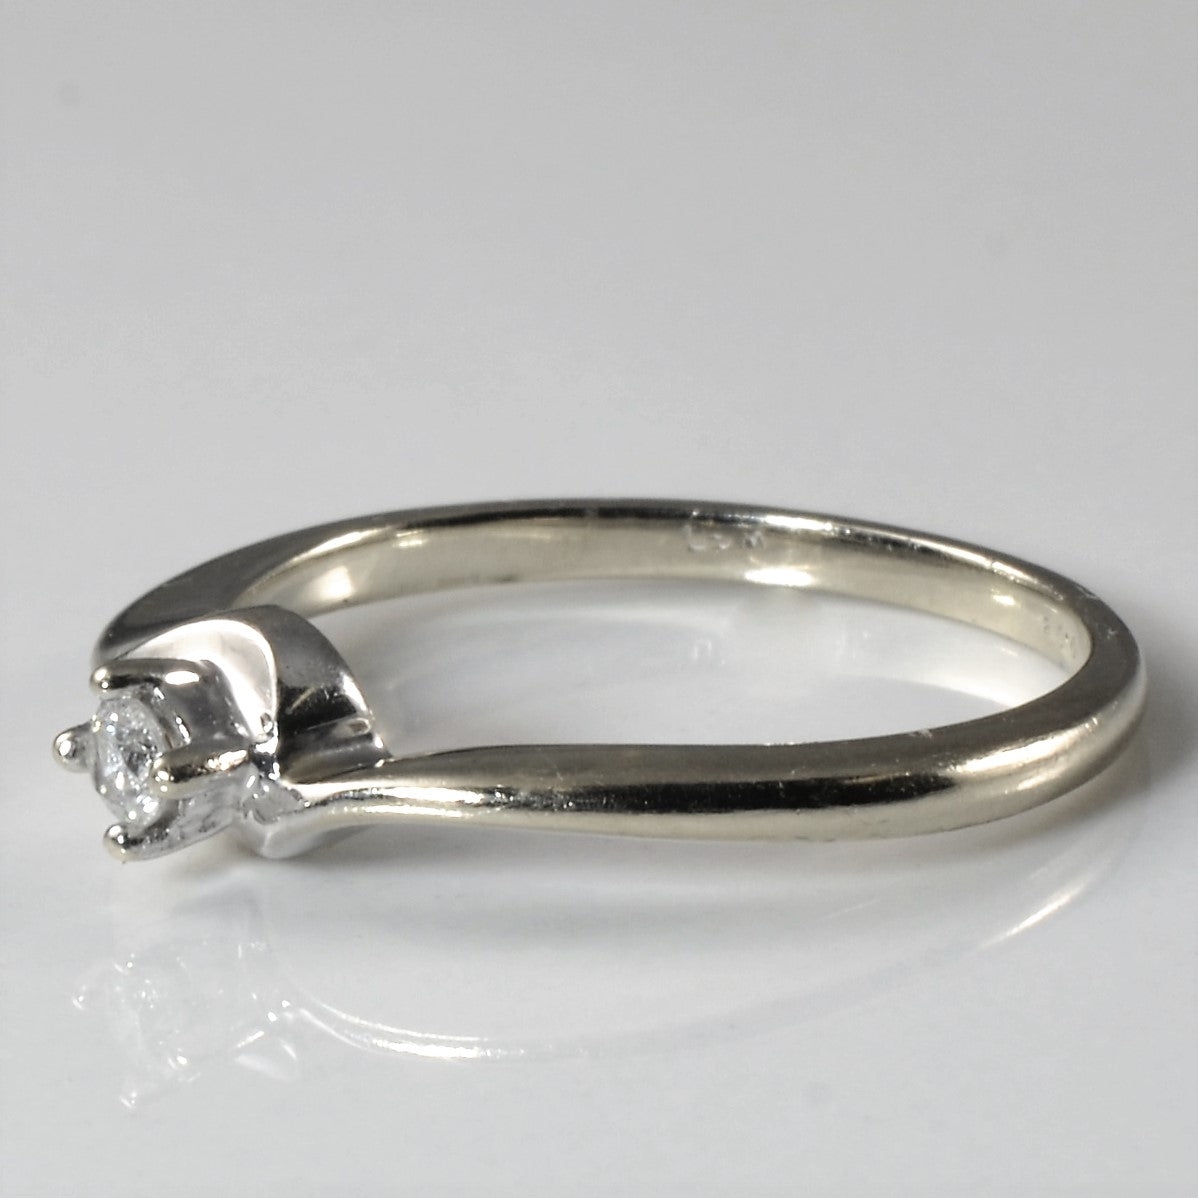 Bypass Solitaire Diamond Ring | 0.06ct | SZ 6.5 |